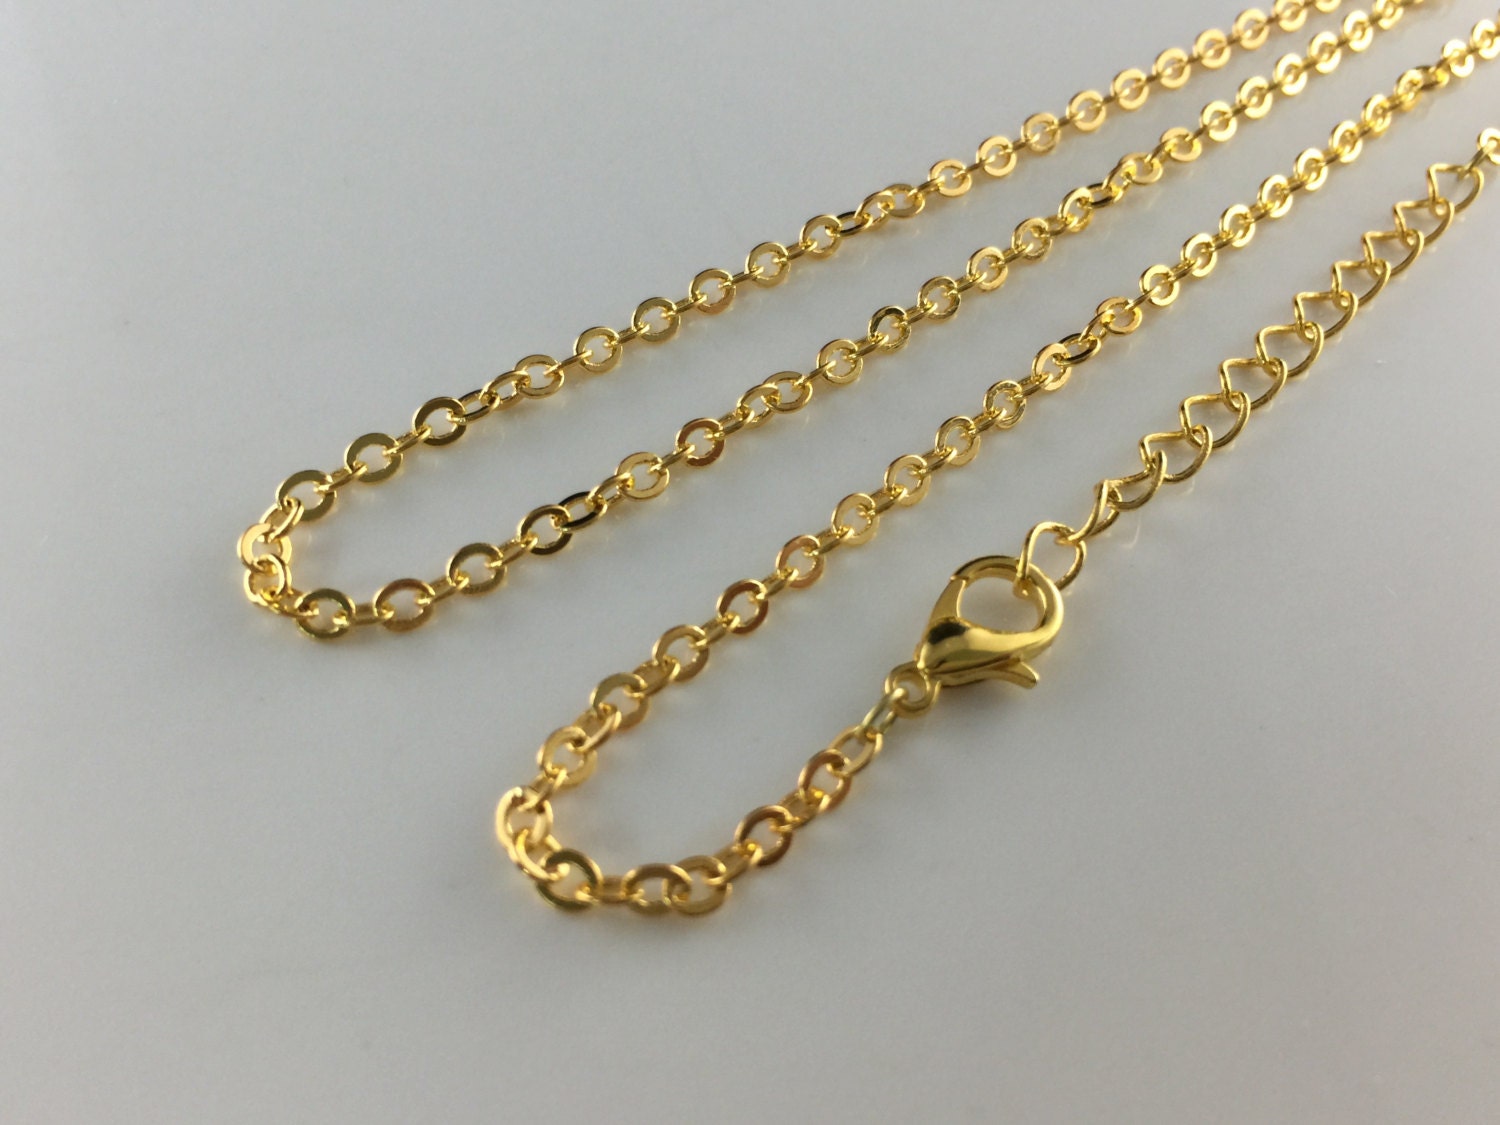 Gold chain necklace chain 2.5mm x 3mm oval links chain whole | Etsy